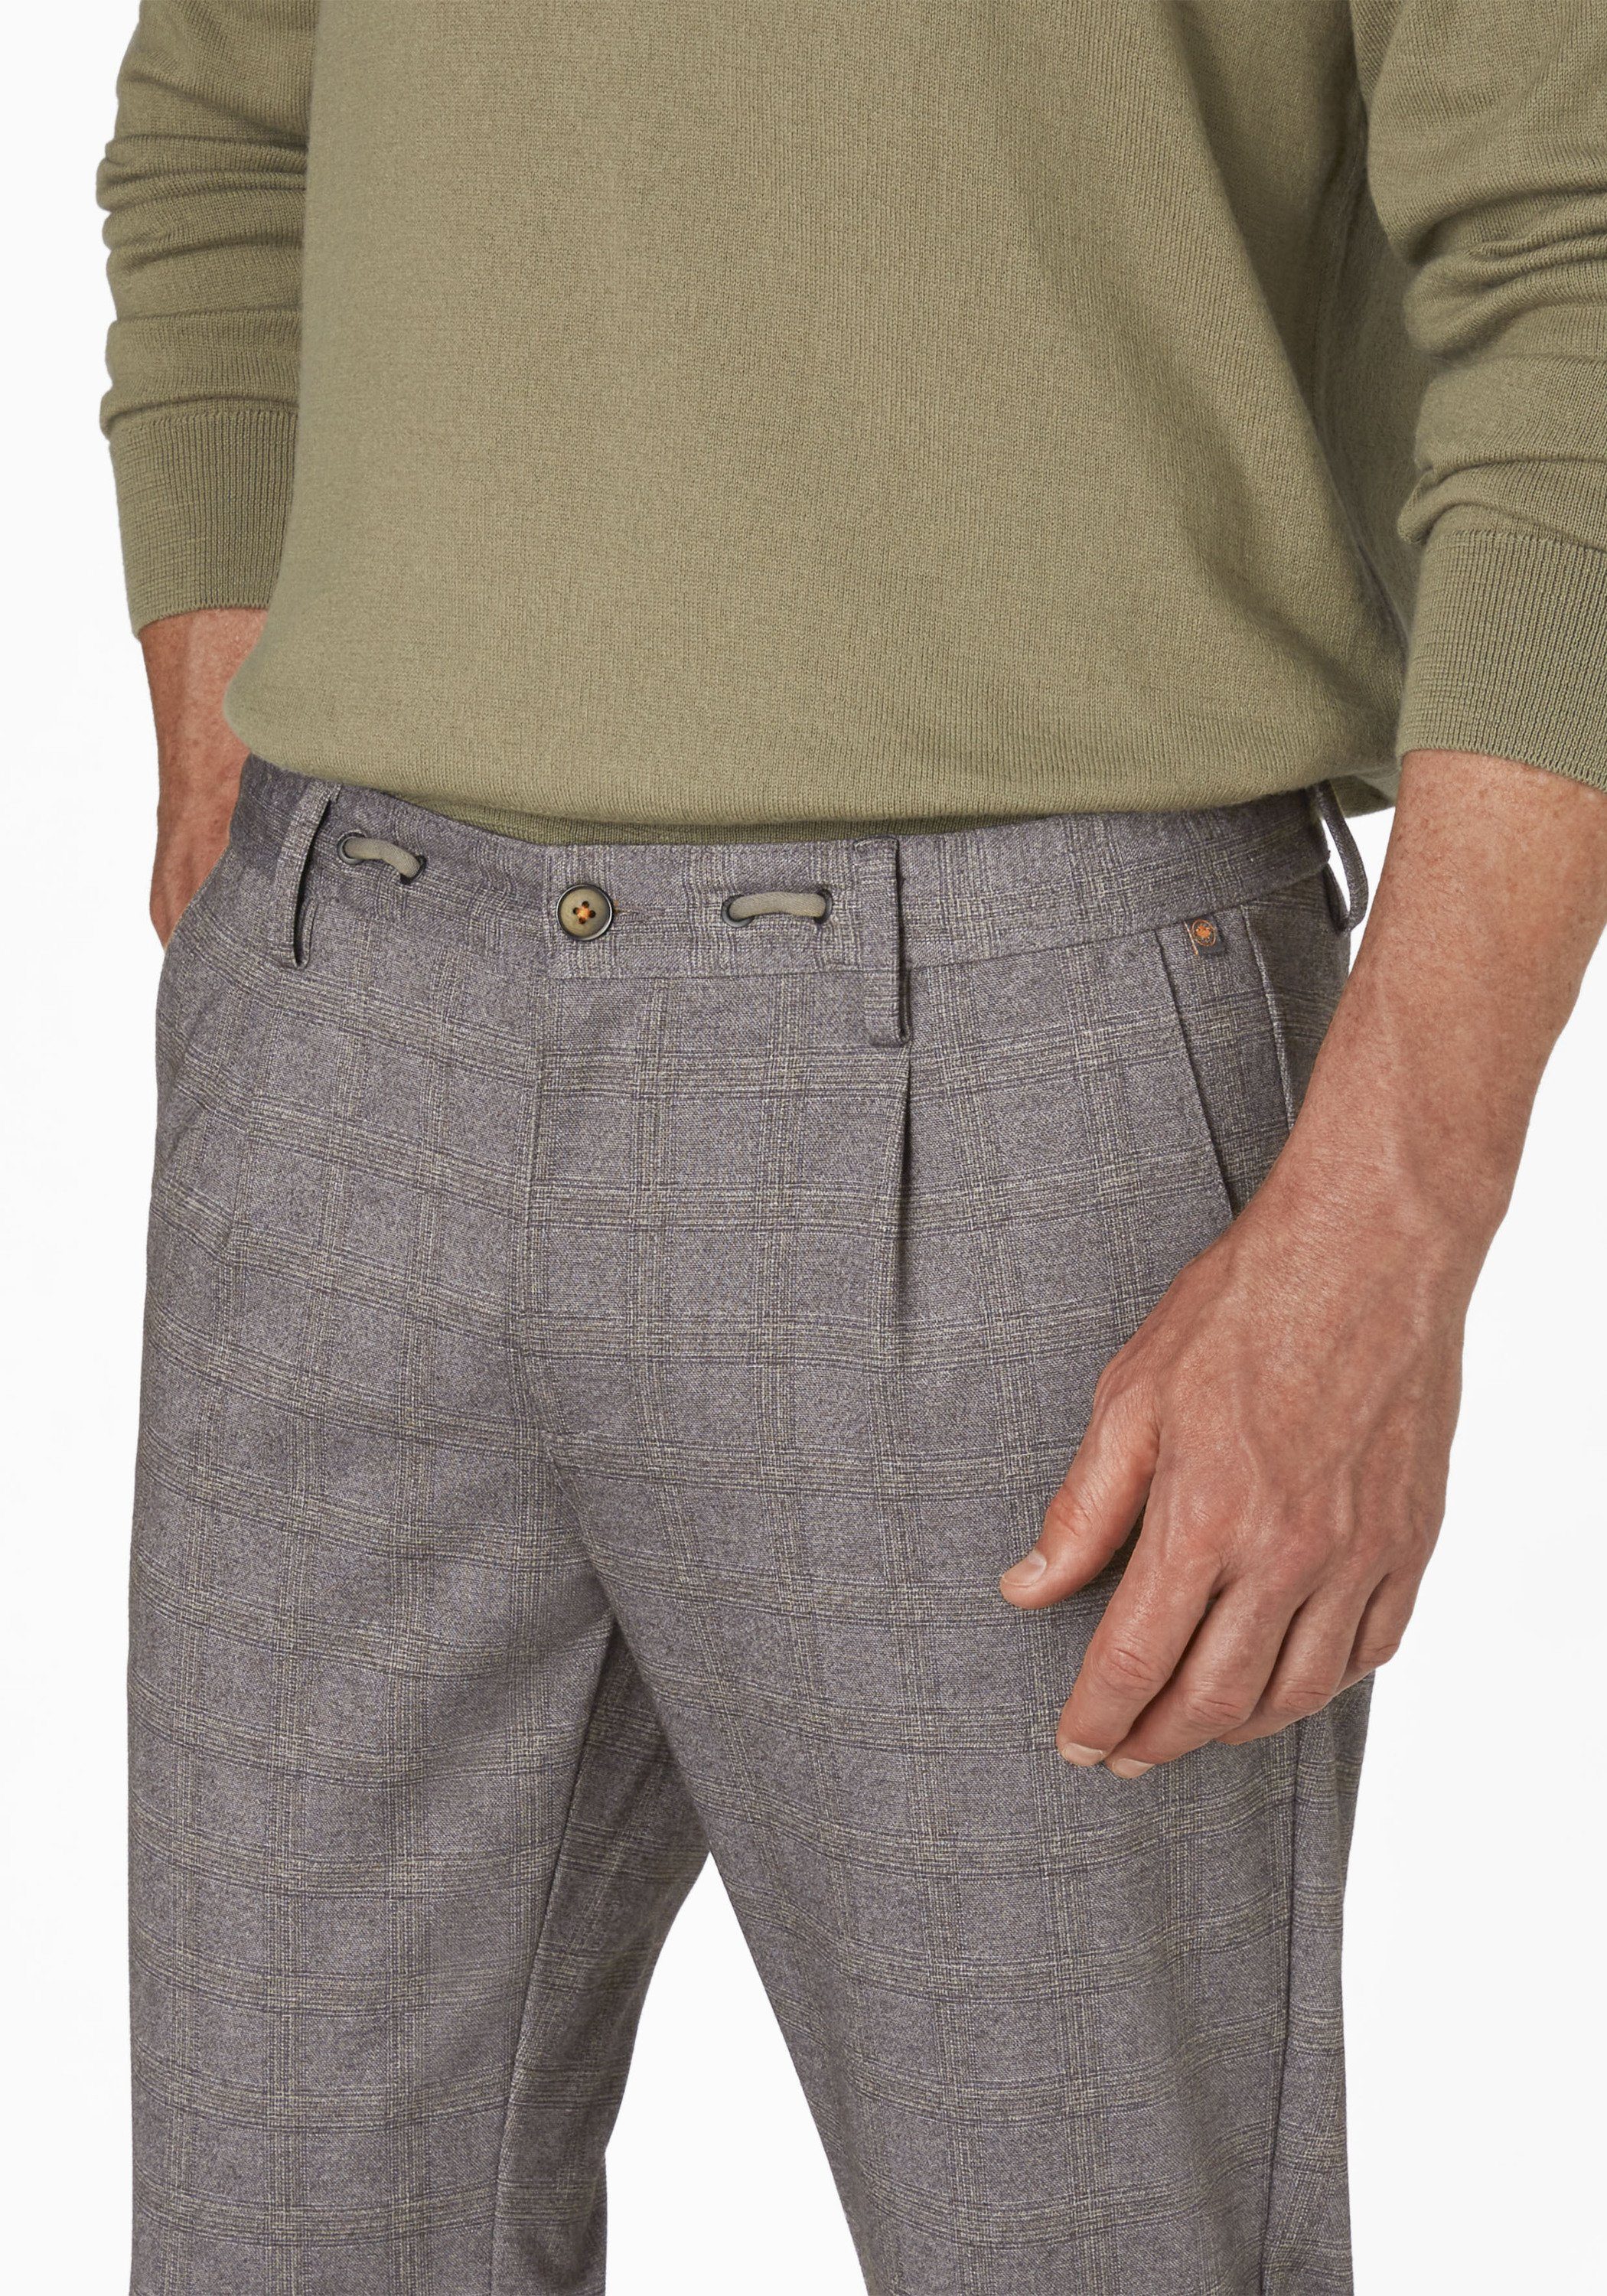 Redpoint Jogg Chinohose mit Slim-Fit COLWOOD Stoffhose Stretch check grey